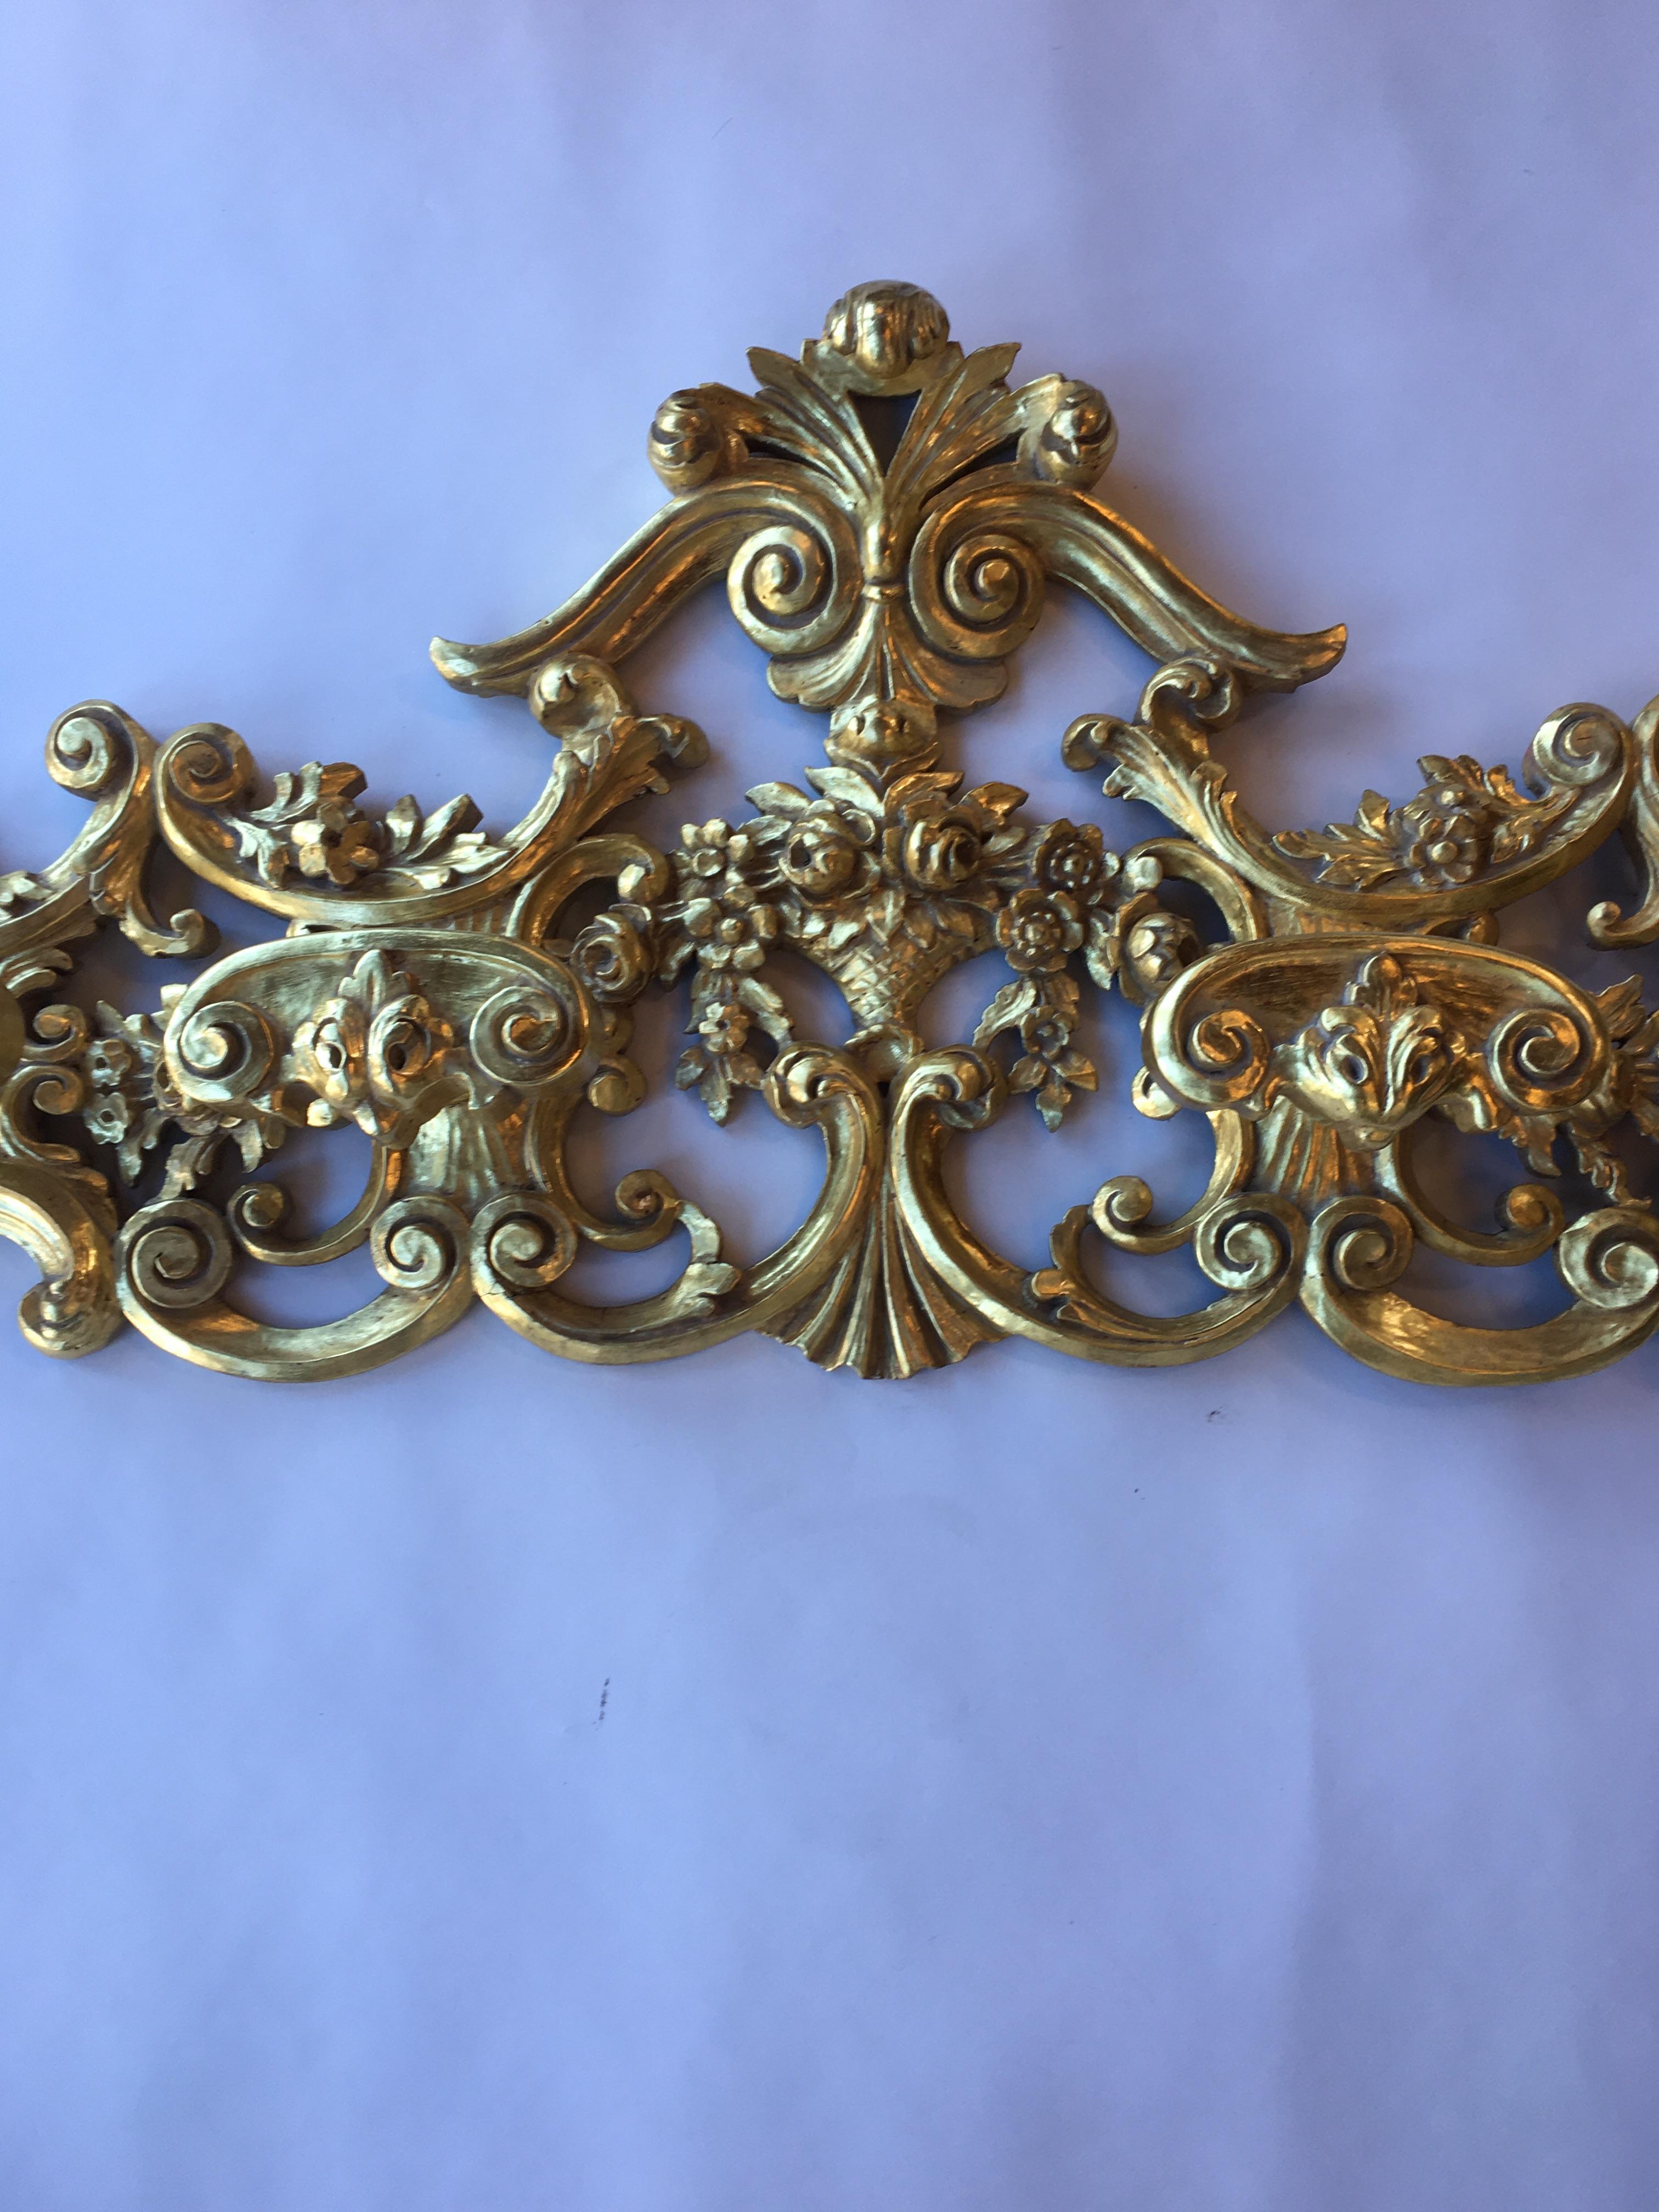 Hand-Carved Late 19th Century Italian Hand Carved 22-Karat Gold Coat Hanger For Sale